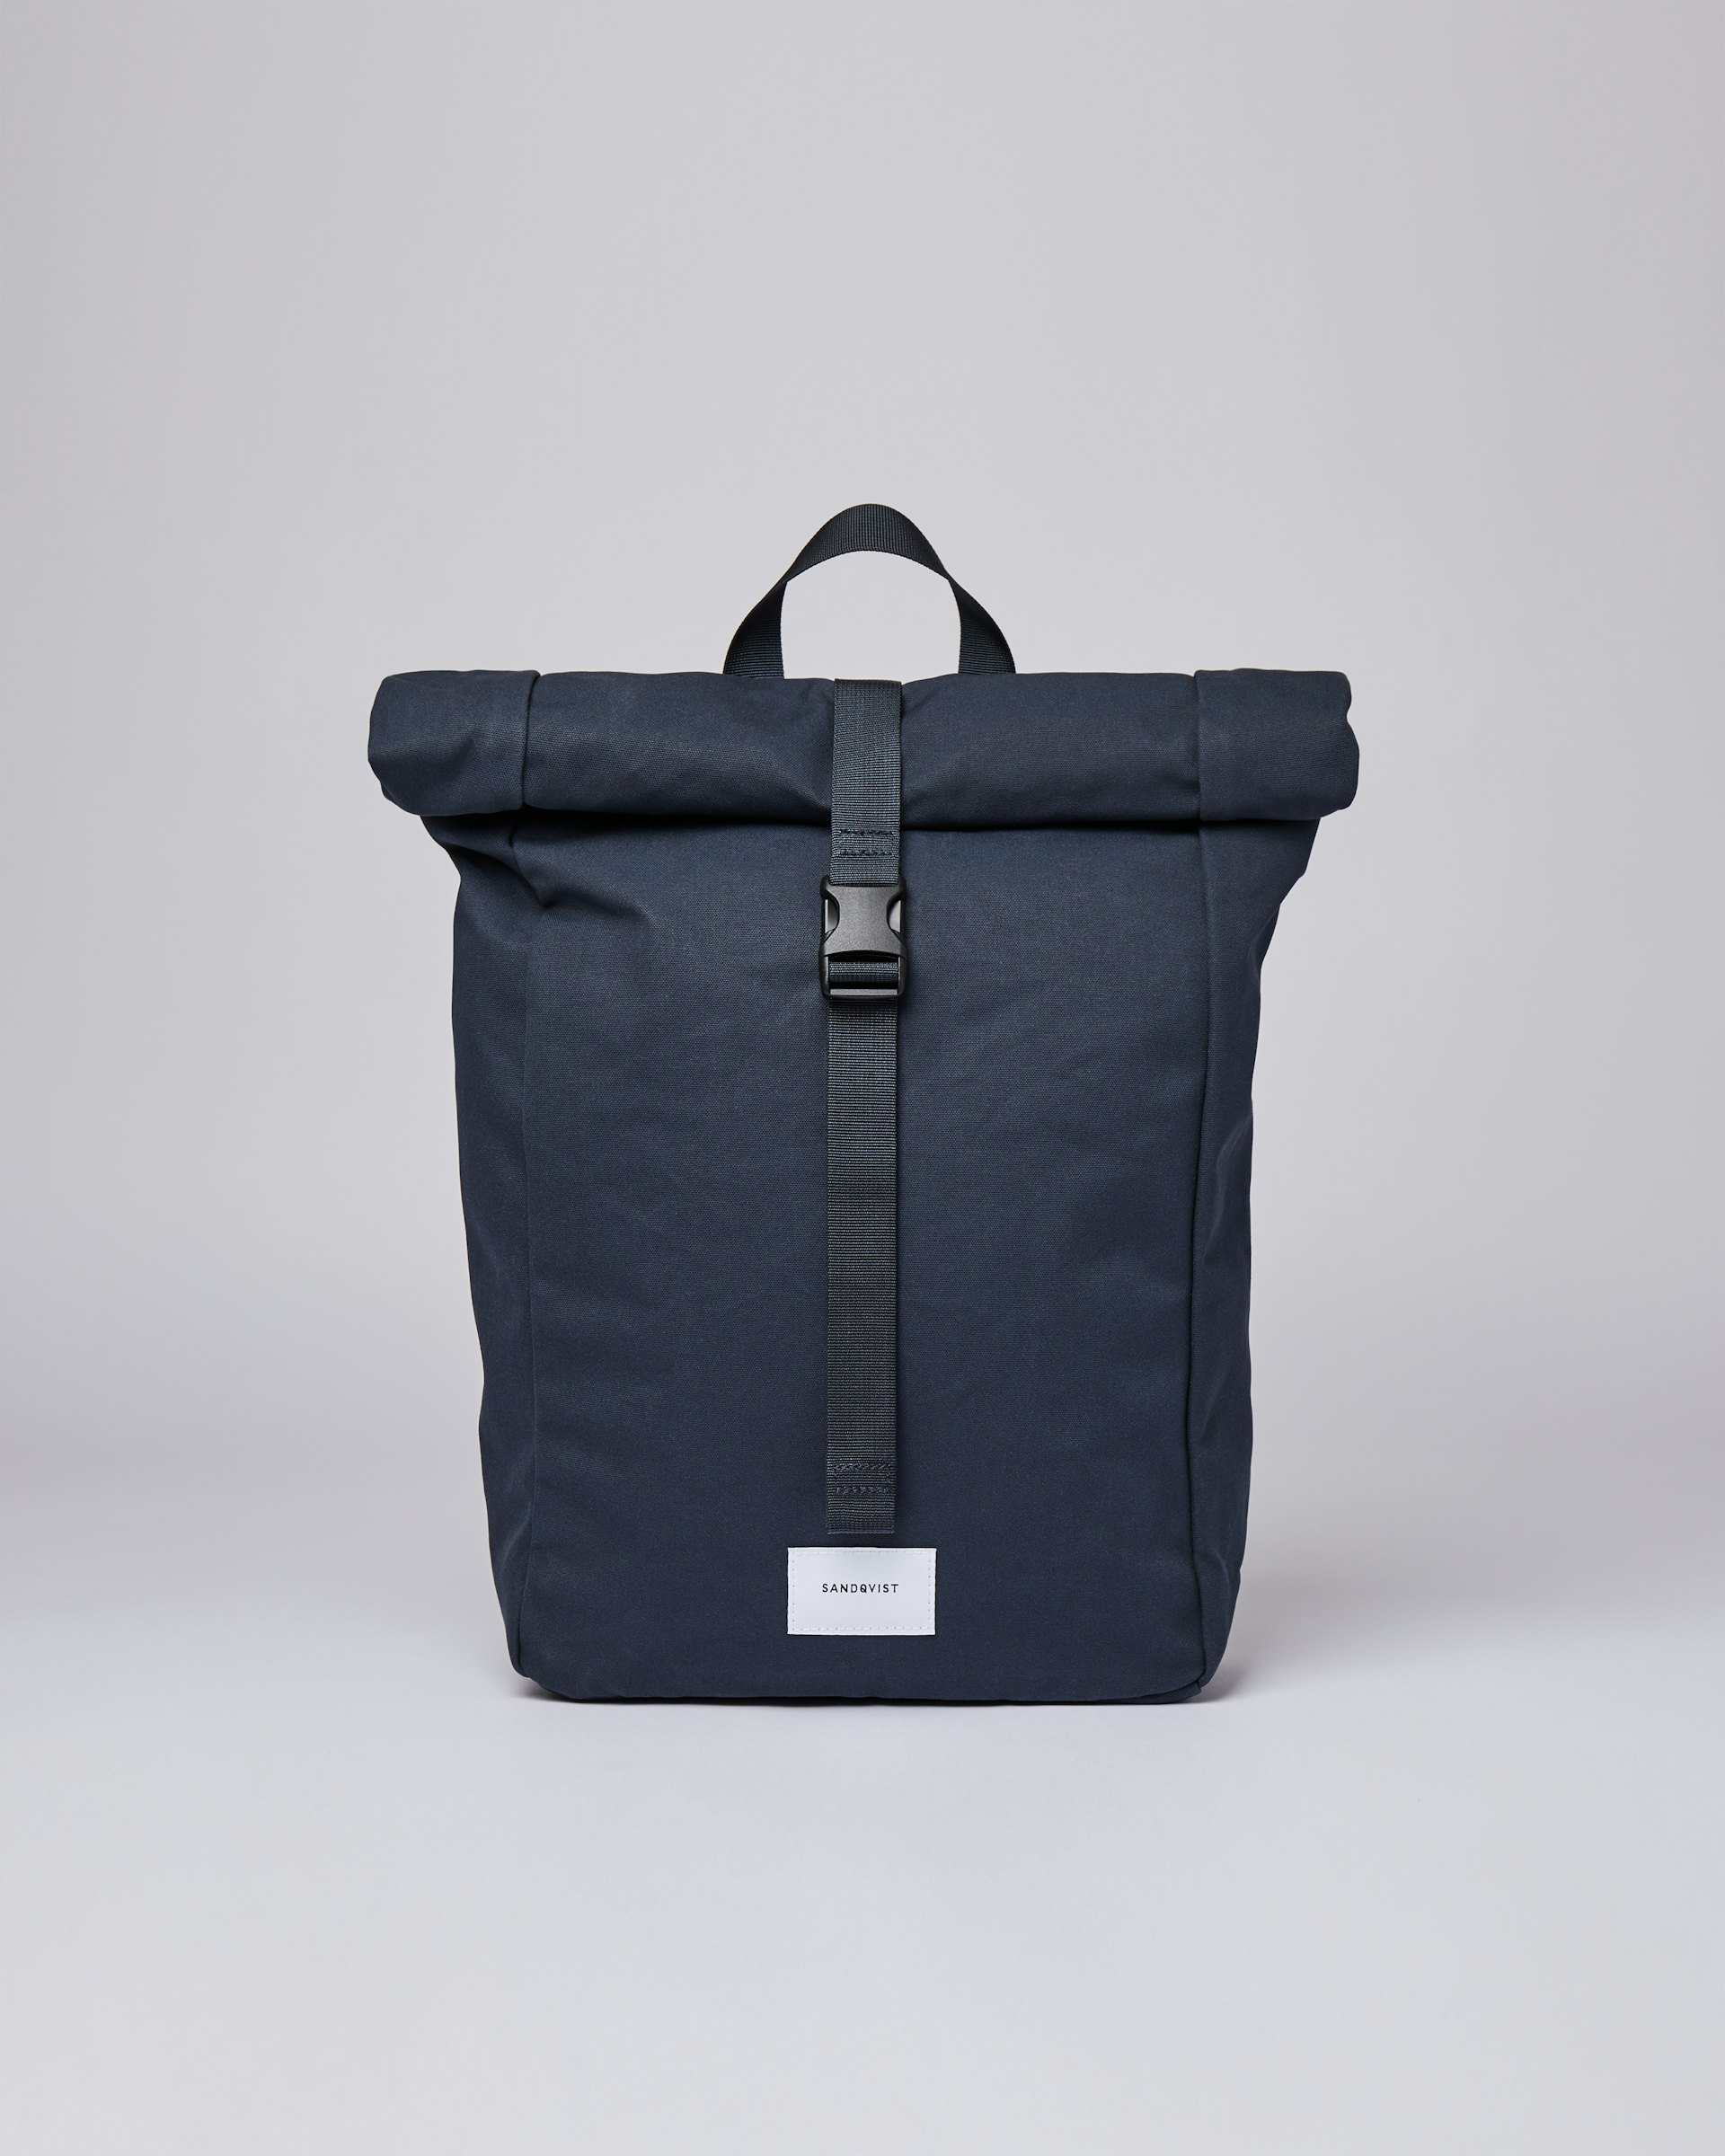 Kaj belongs to the category Backpacks and is in color navy